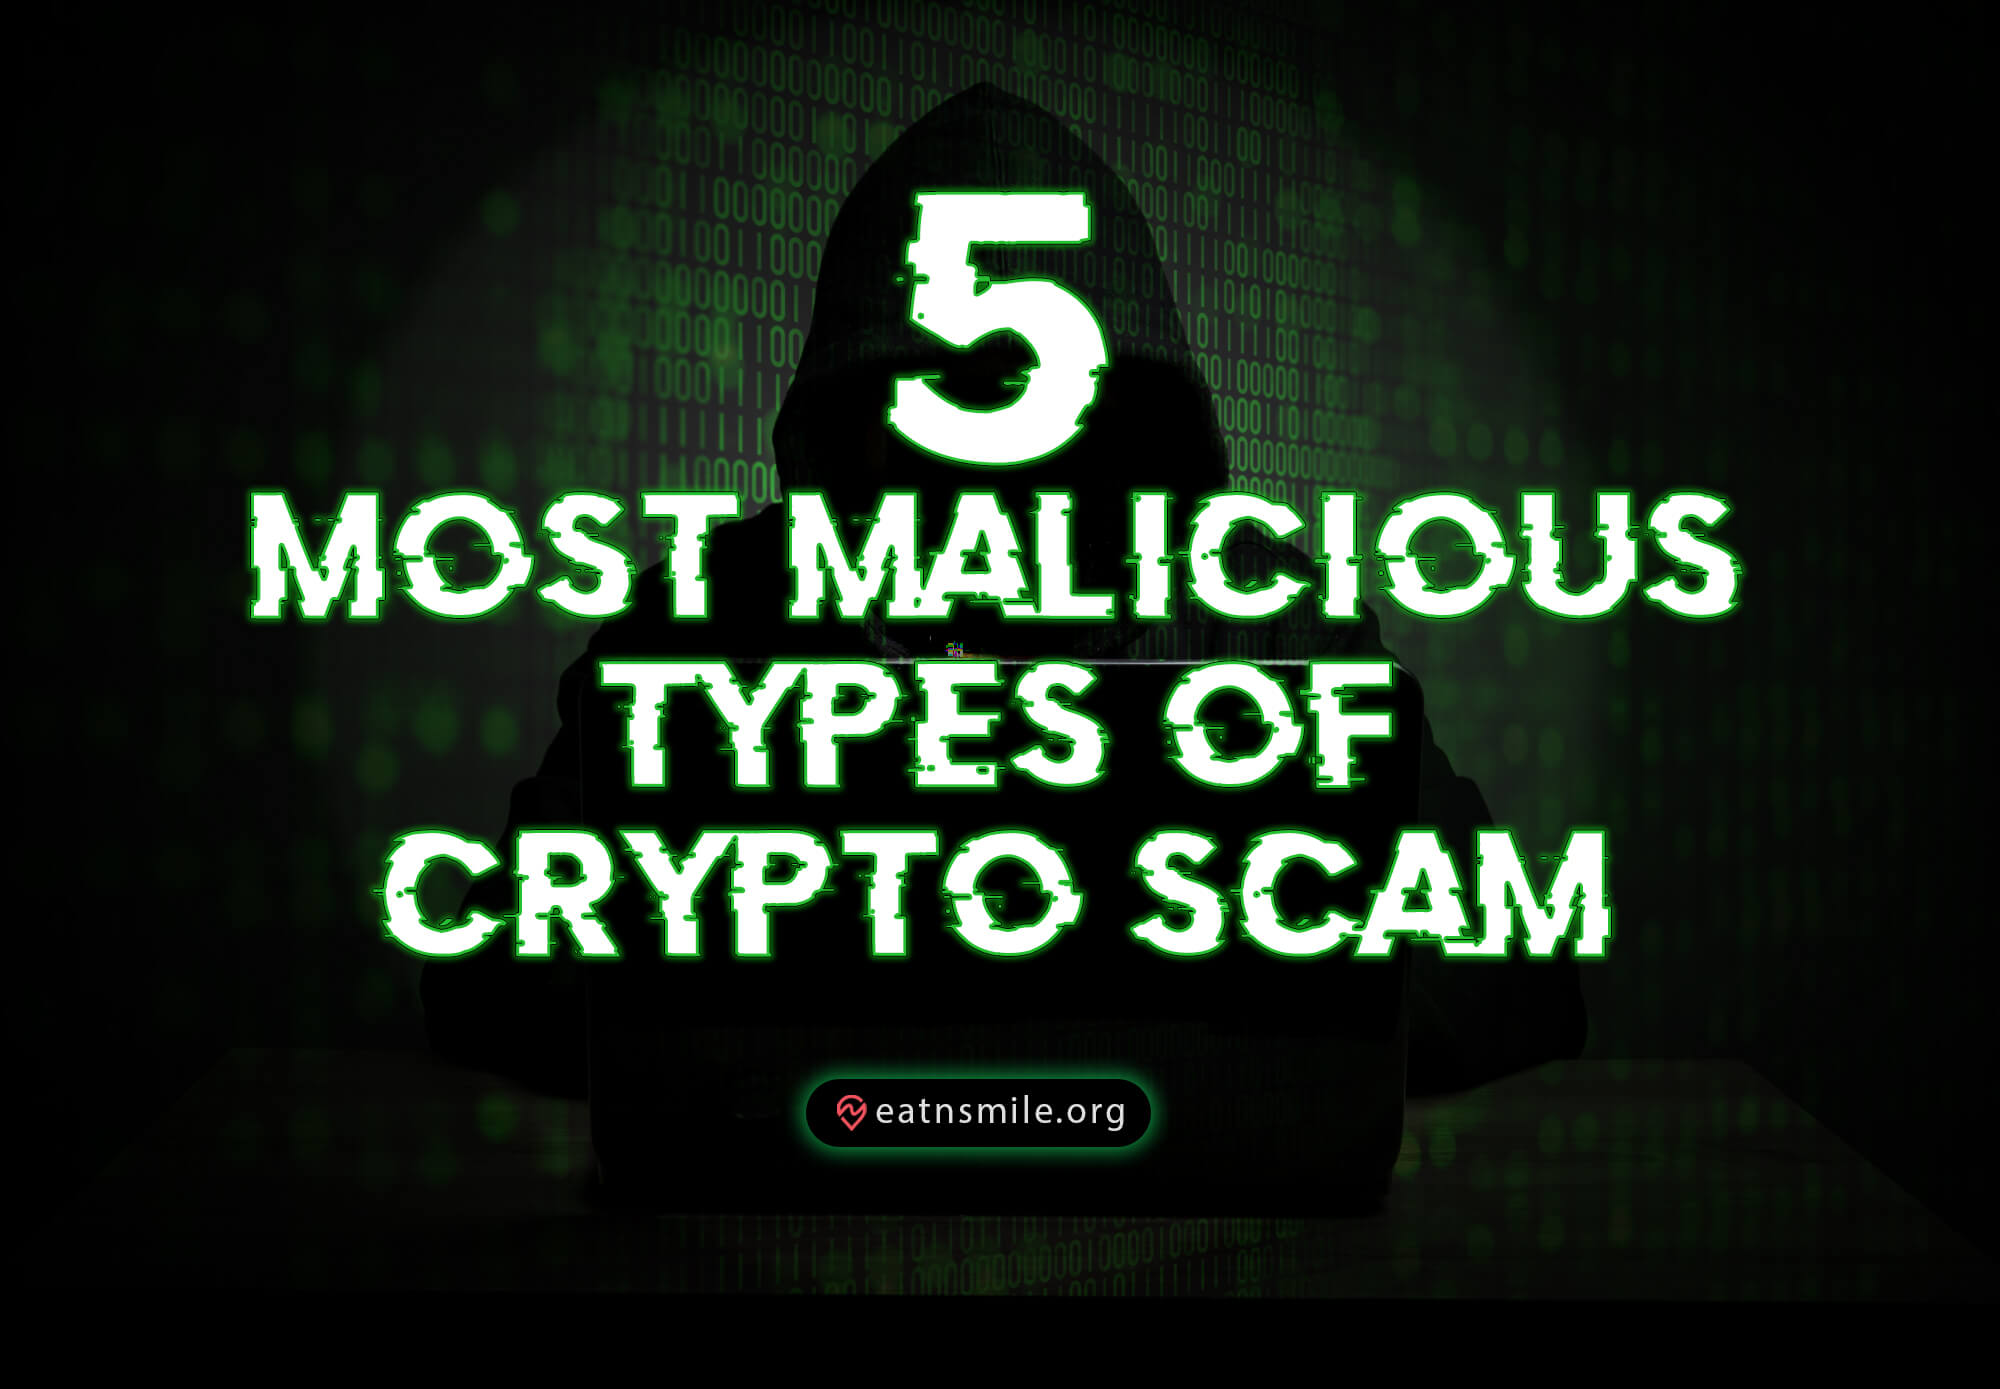 5 of the most malicious crypto scam types and how to protect yourself thumbnail (1)